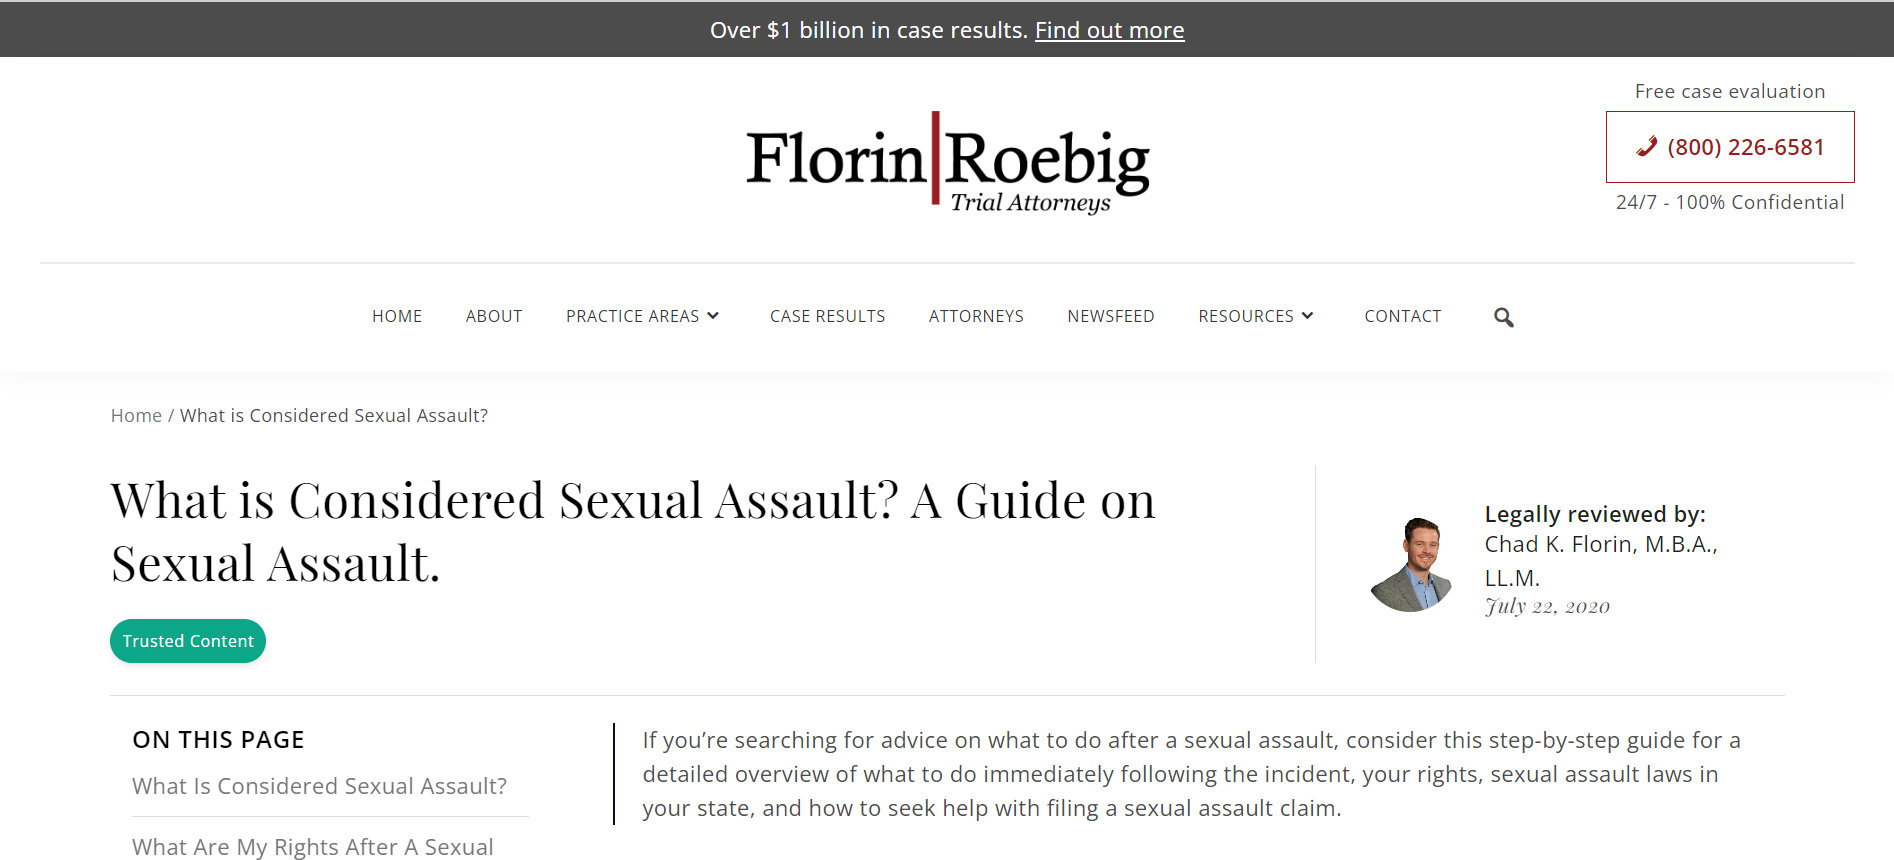 A Guide on Sexual Assault